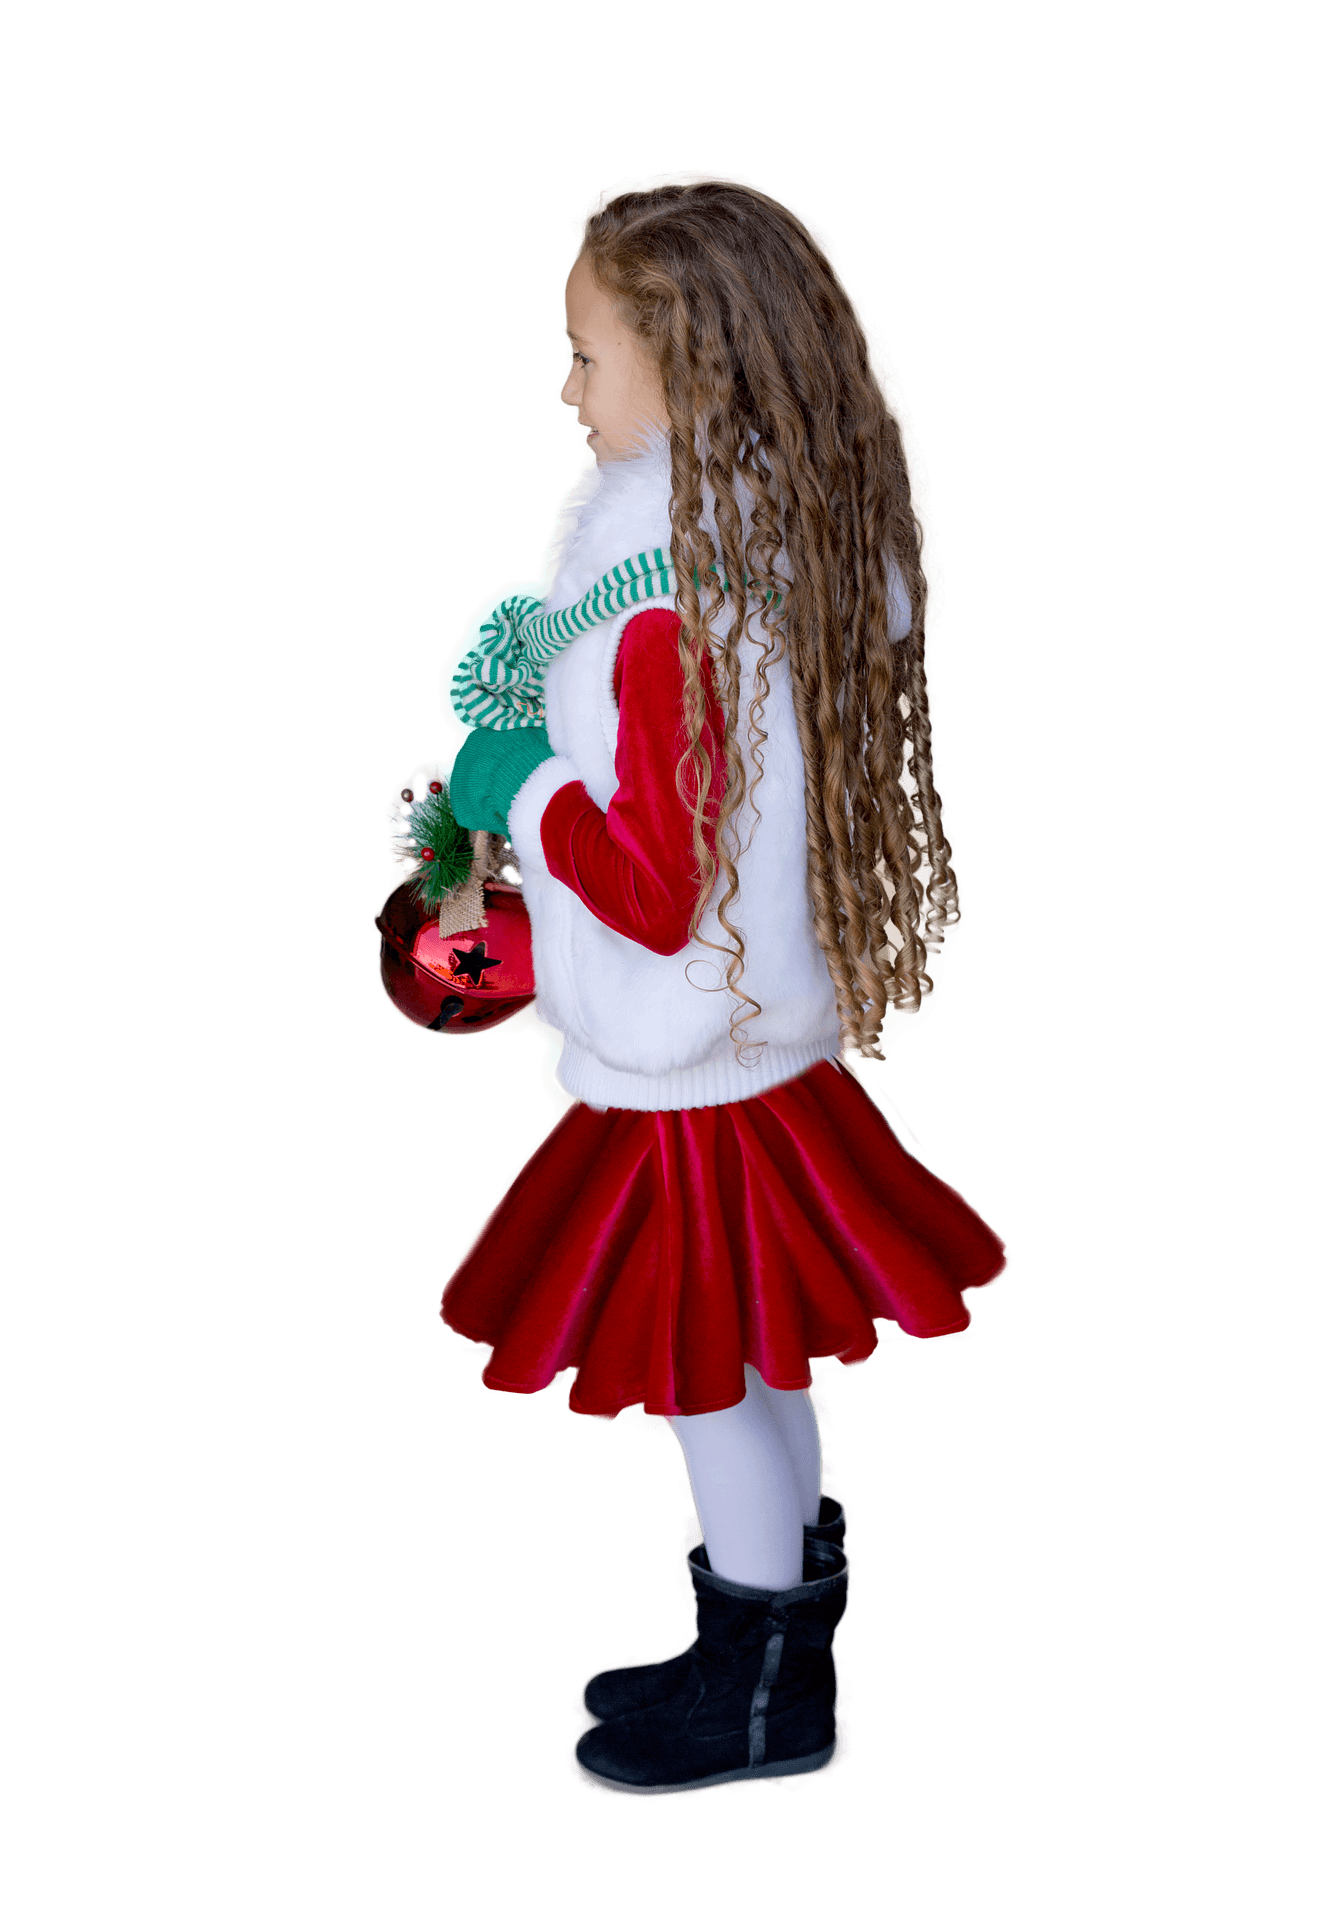 Girlin Christmas Outfit Holding Ornament PNG image